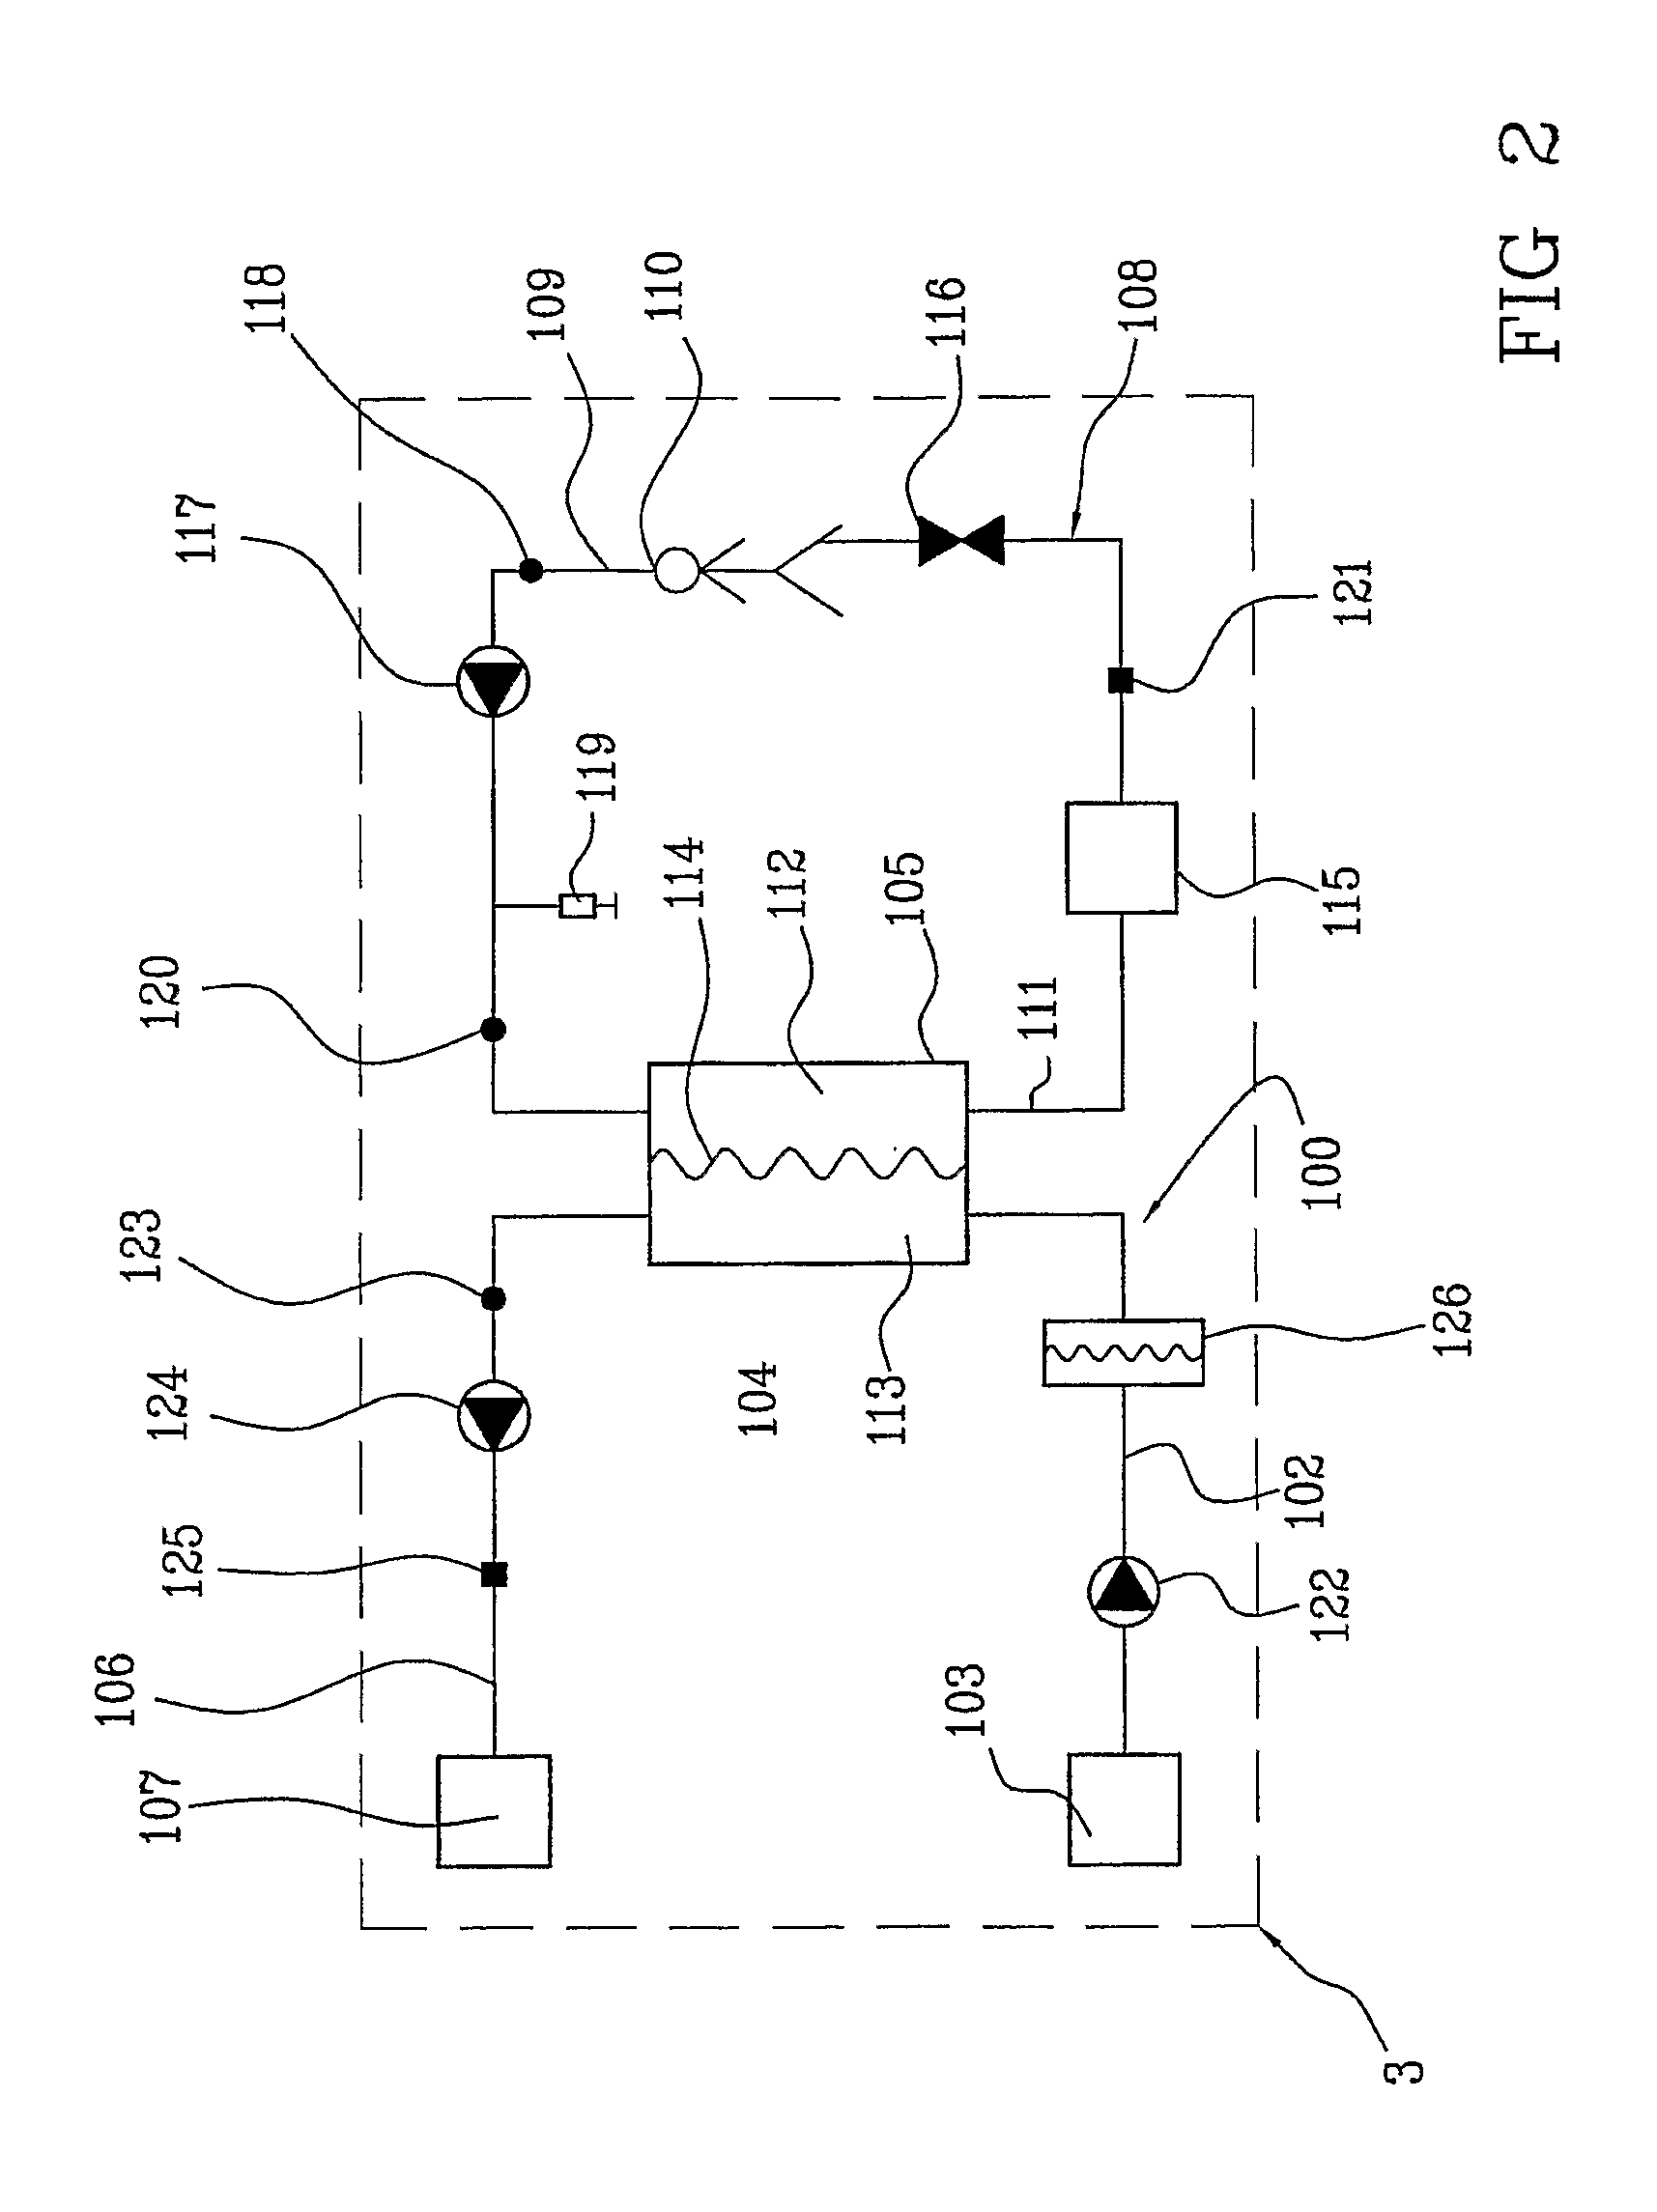 Medical apparatus comprising a machine for treatment of fluids